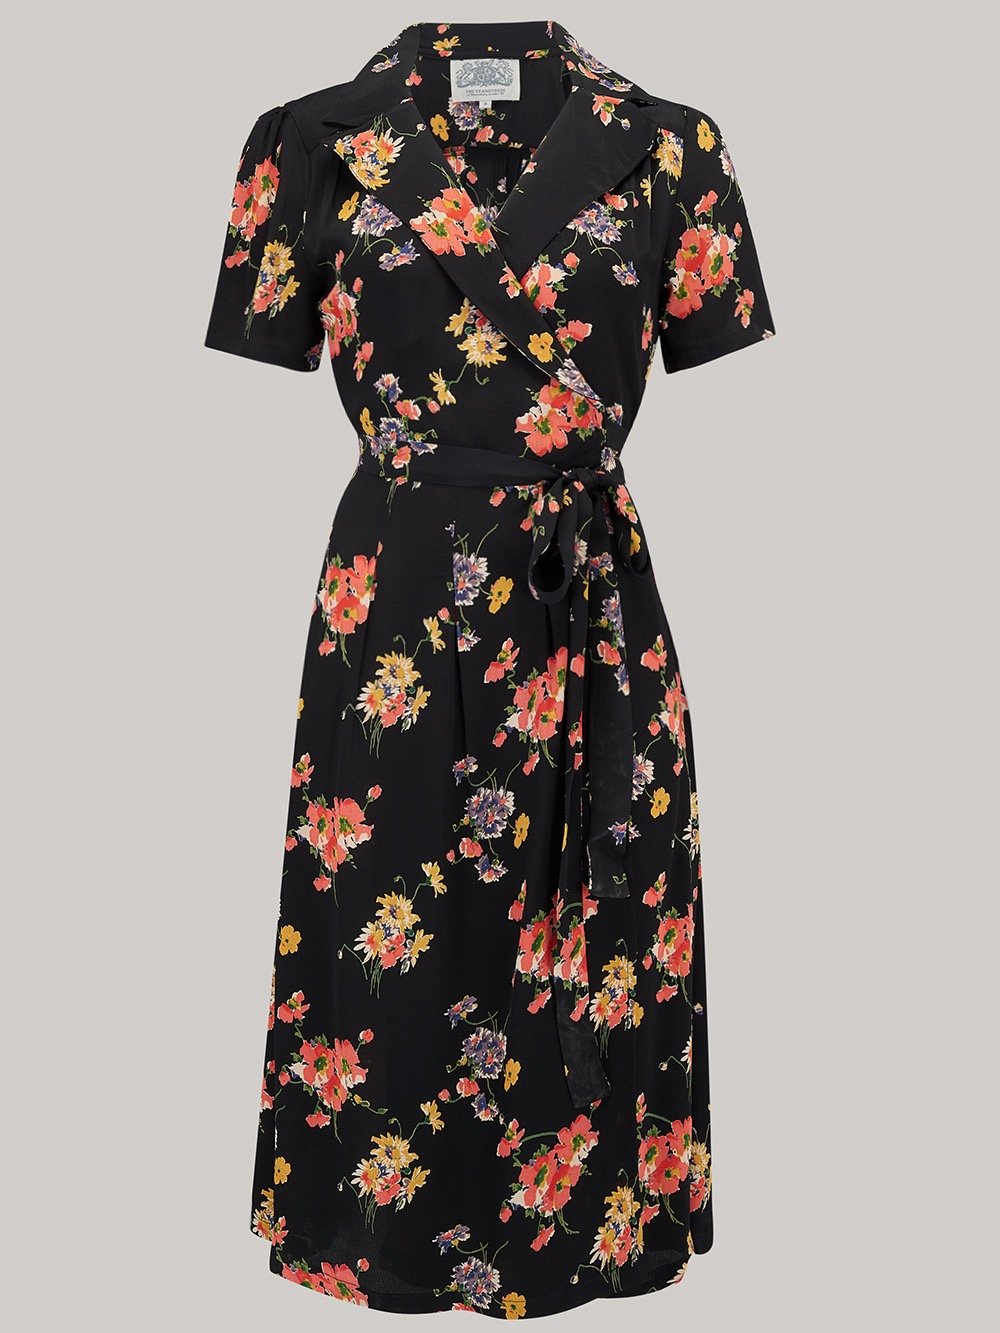 "Peggy" Wrap Dress in Black with Mayflower Print, Classic 1940s Vintage Inspired - CC41, Goodwood Revival, Twinwood Festival, Viva Las Vegas Rockabilly Weekend Rock n Romance The Seamstress of Bloomsbury